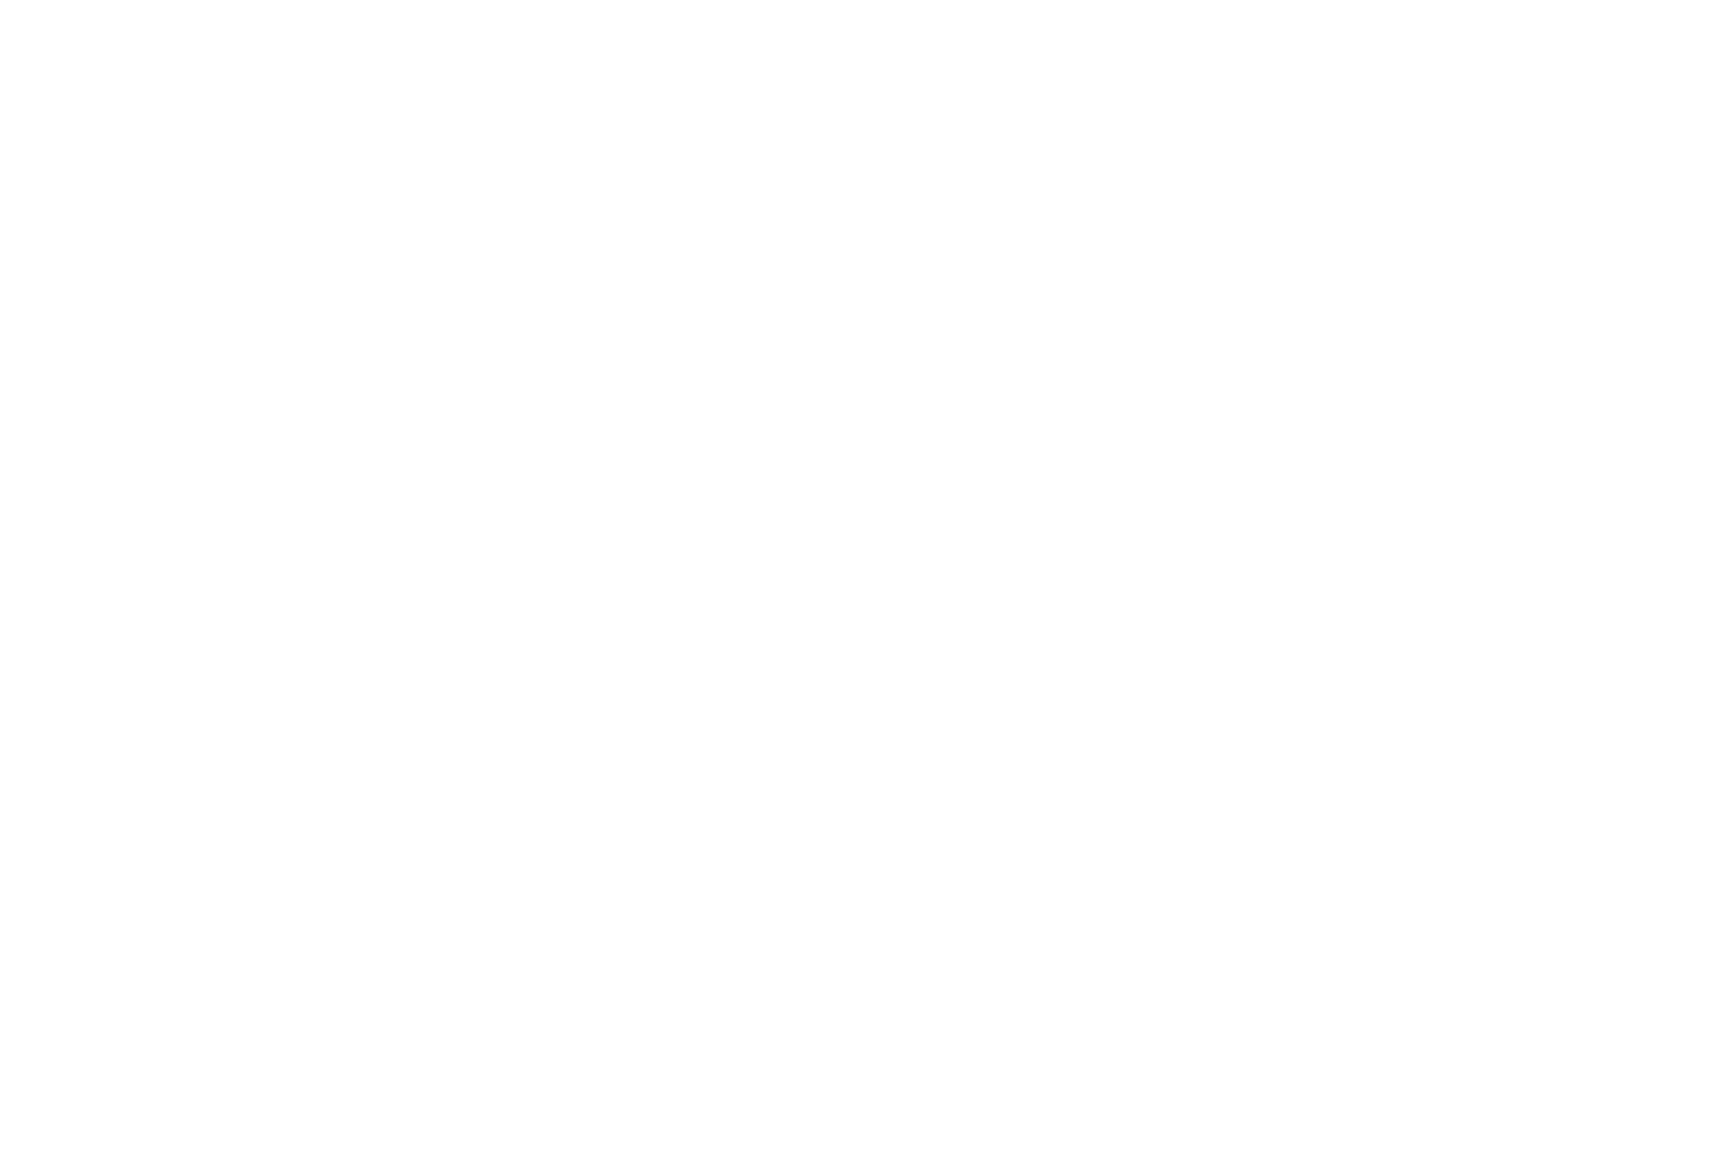 OFFICIAL SELECTION - Rome Music Video Awards - 2021.png